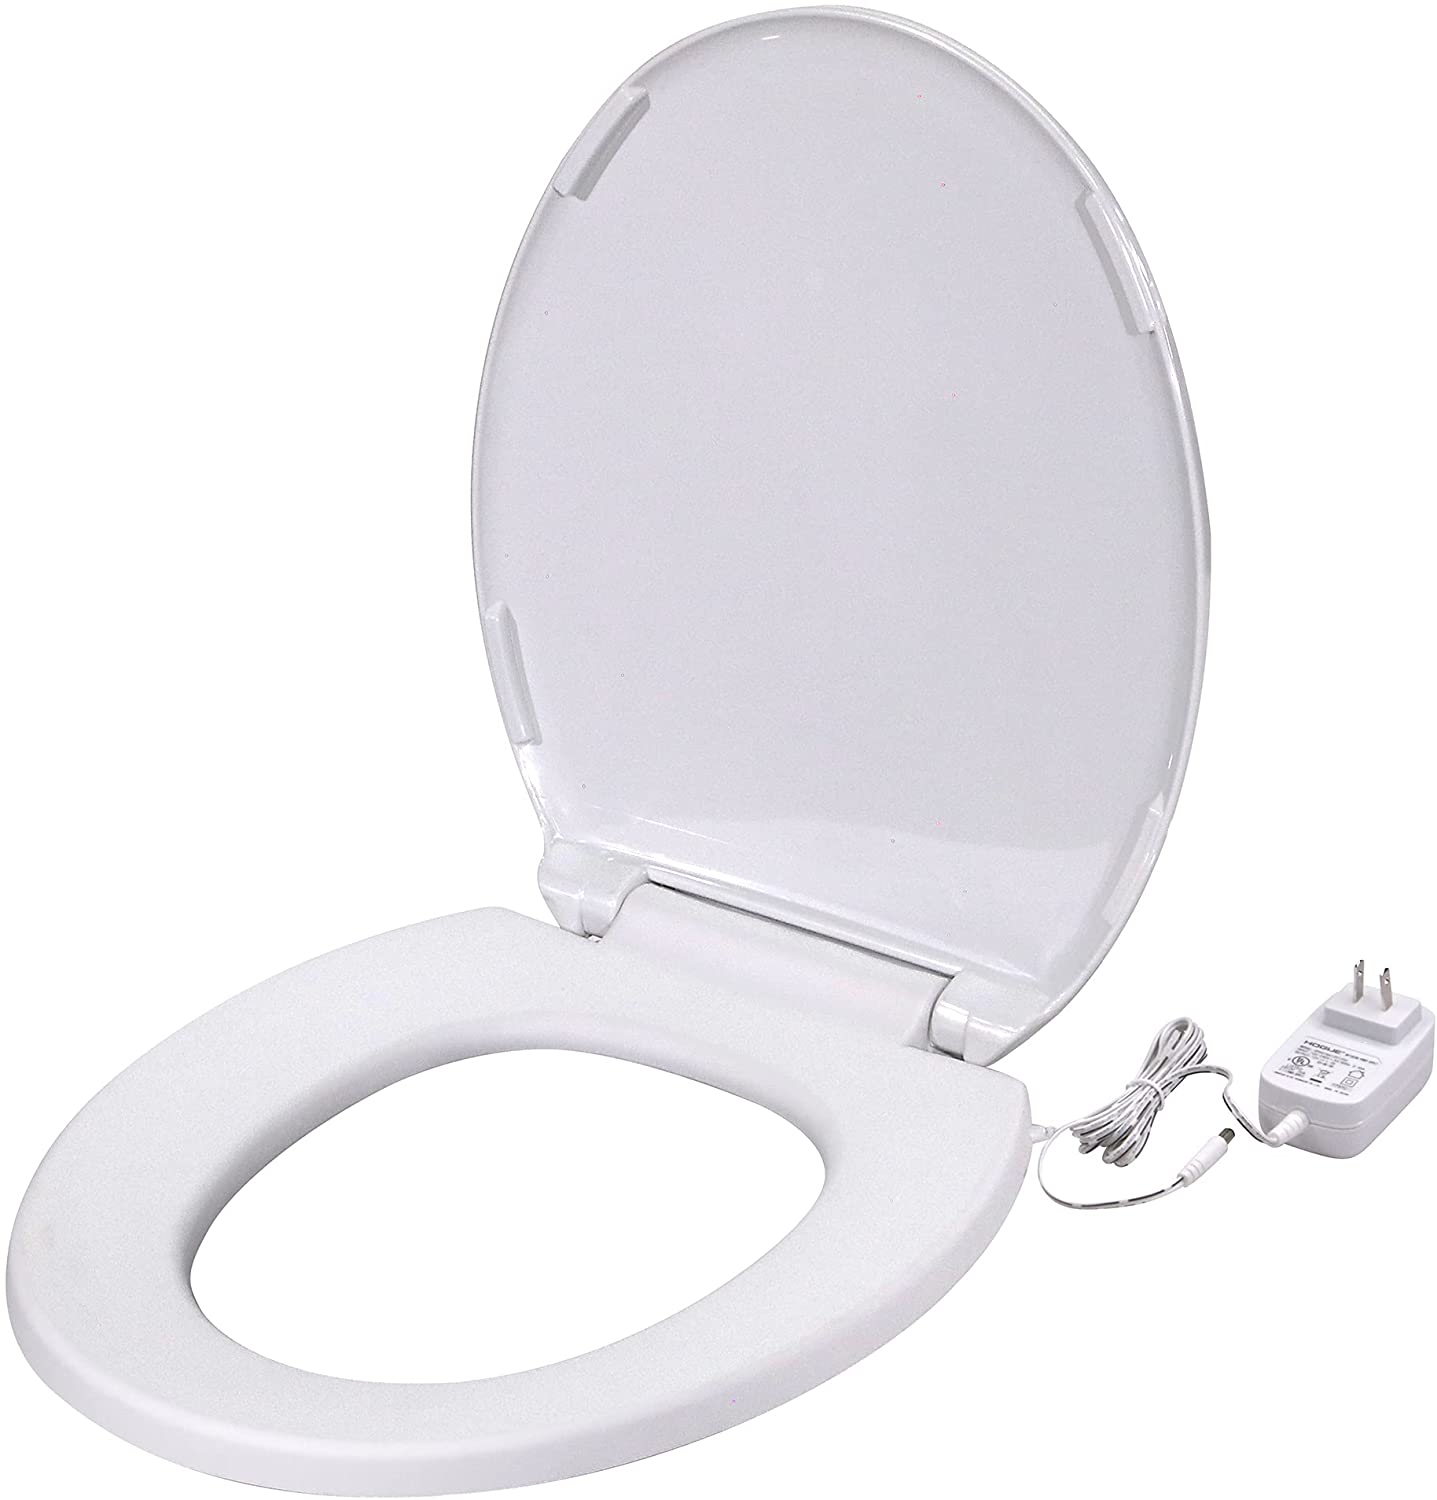 UltraTouch Heated Toilet Seat